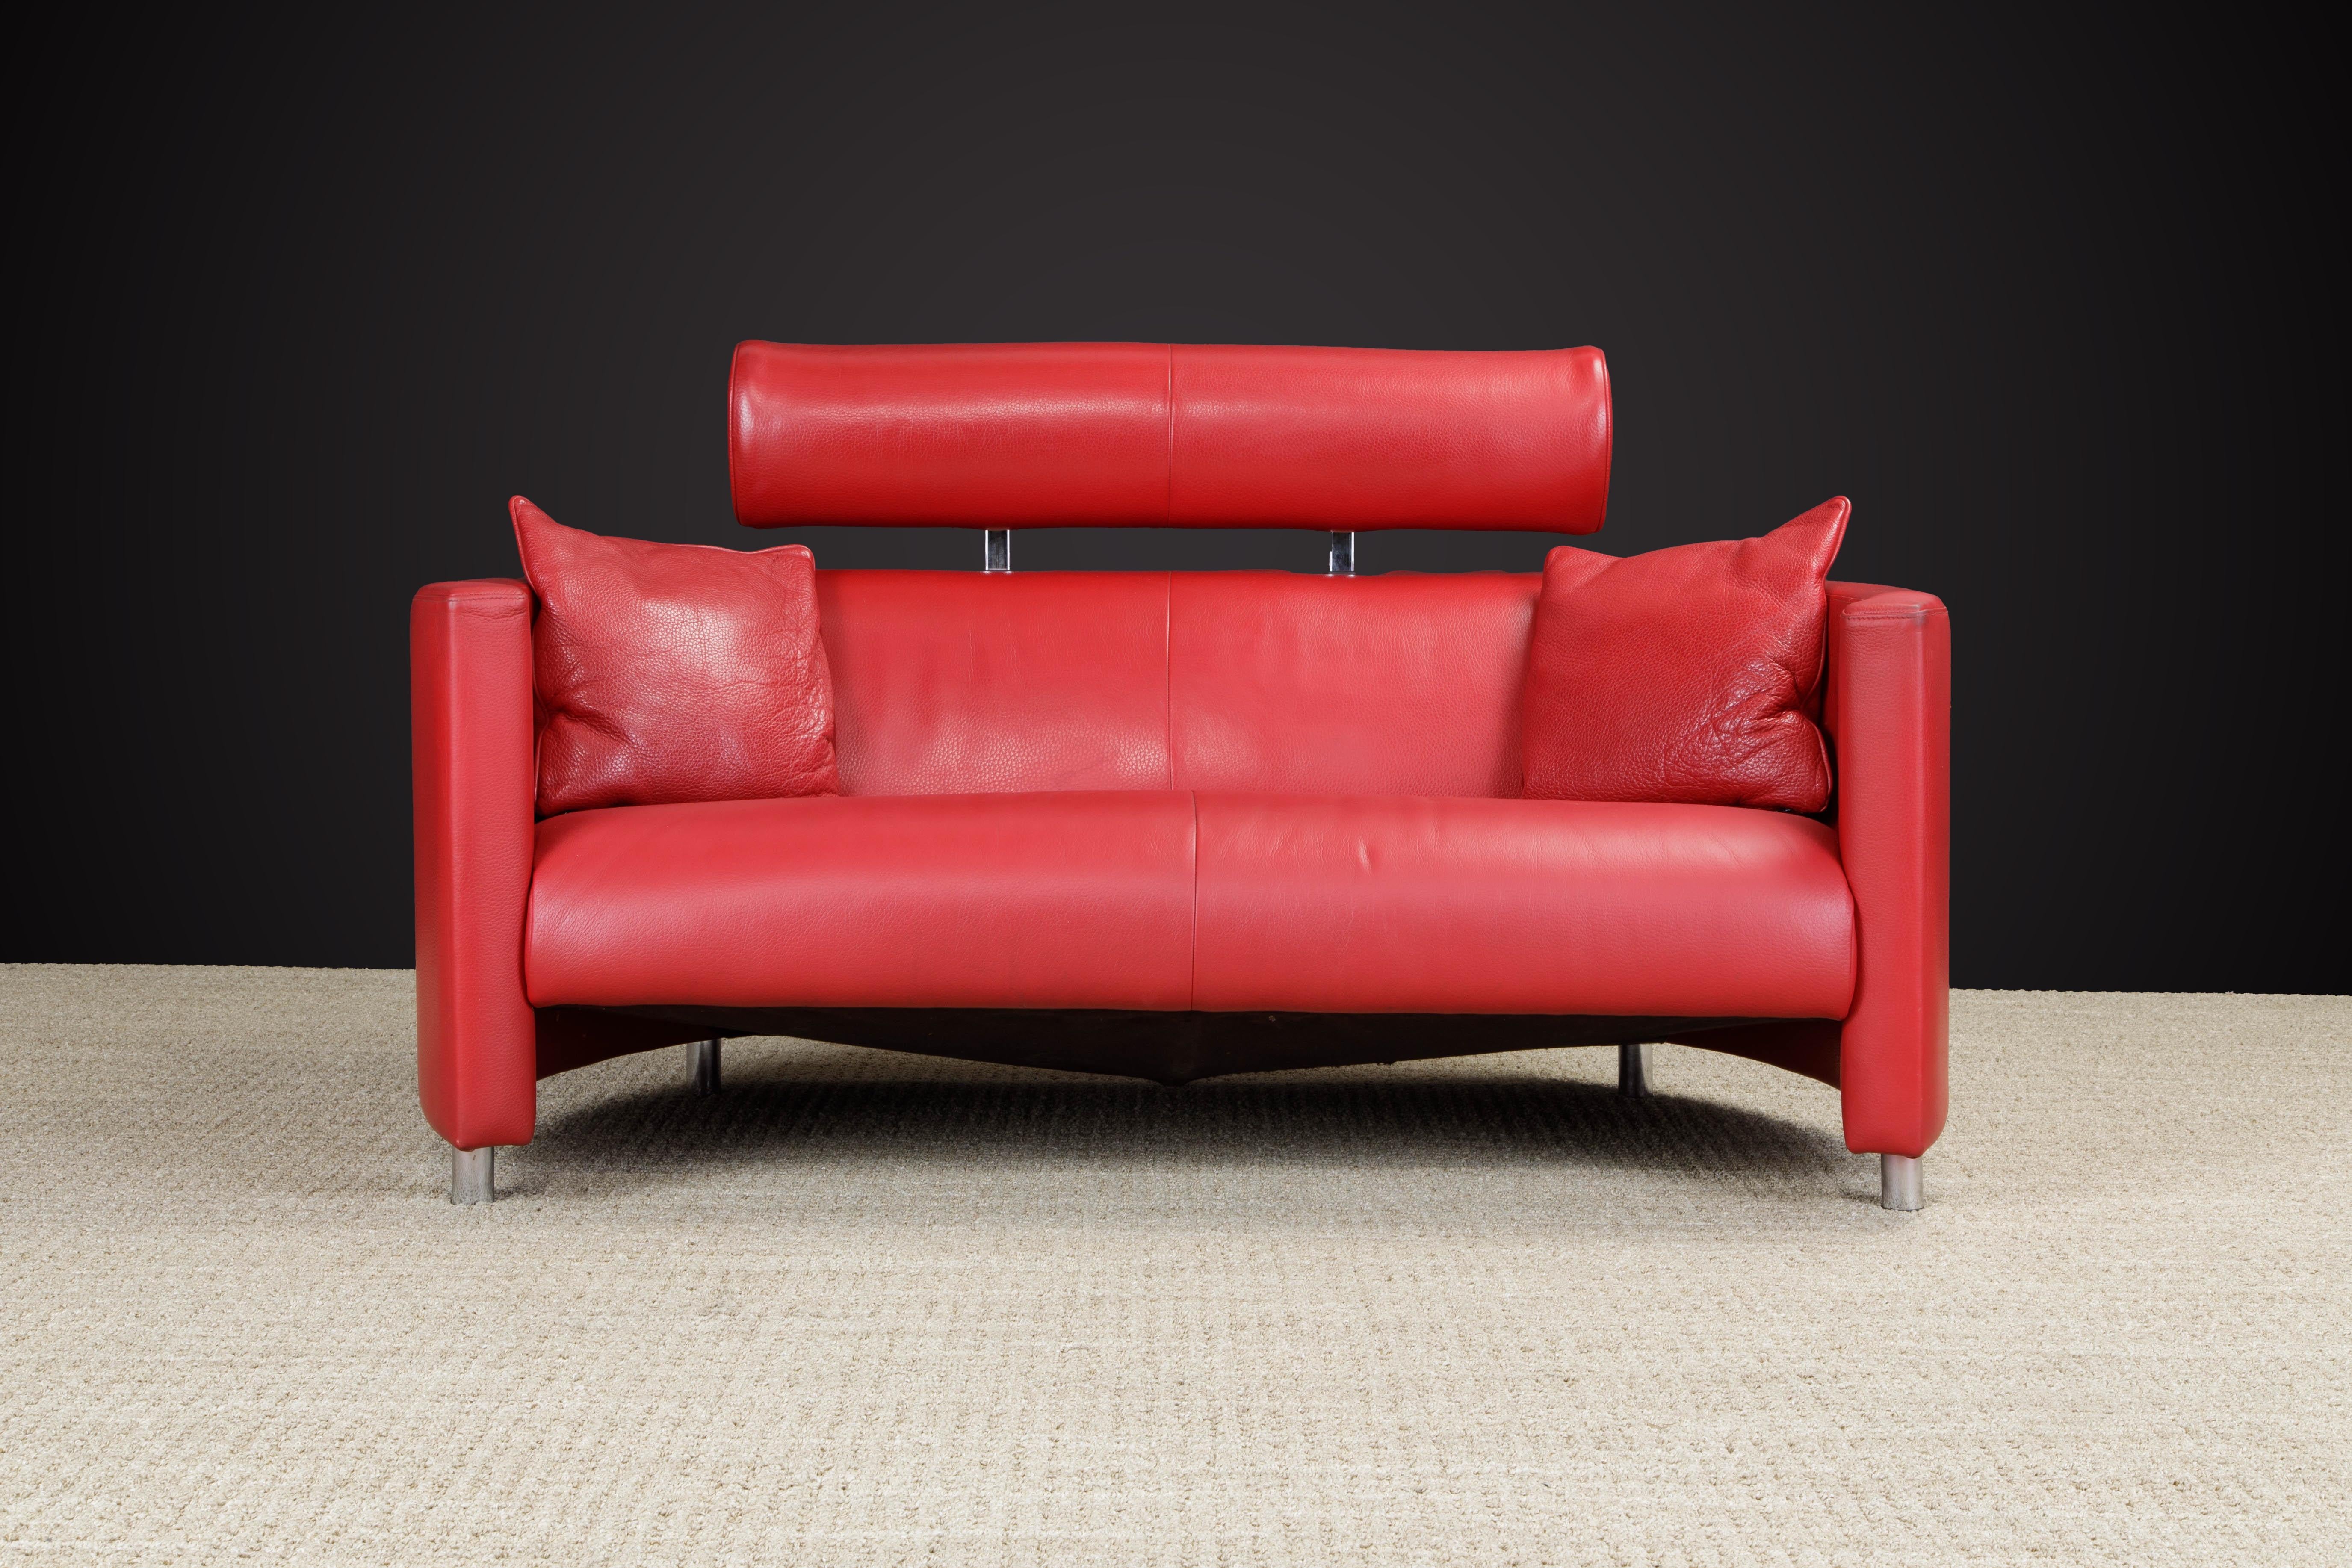 This beautiful red leather Post-Modern loveseat sofa designed by Bernard Massot and produced by Massot, France in circa 1980s/90s. 

Featuring gorgeous red pebbled leather wrapped around the sensual curved sides with chrome-plated steel legs, the